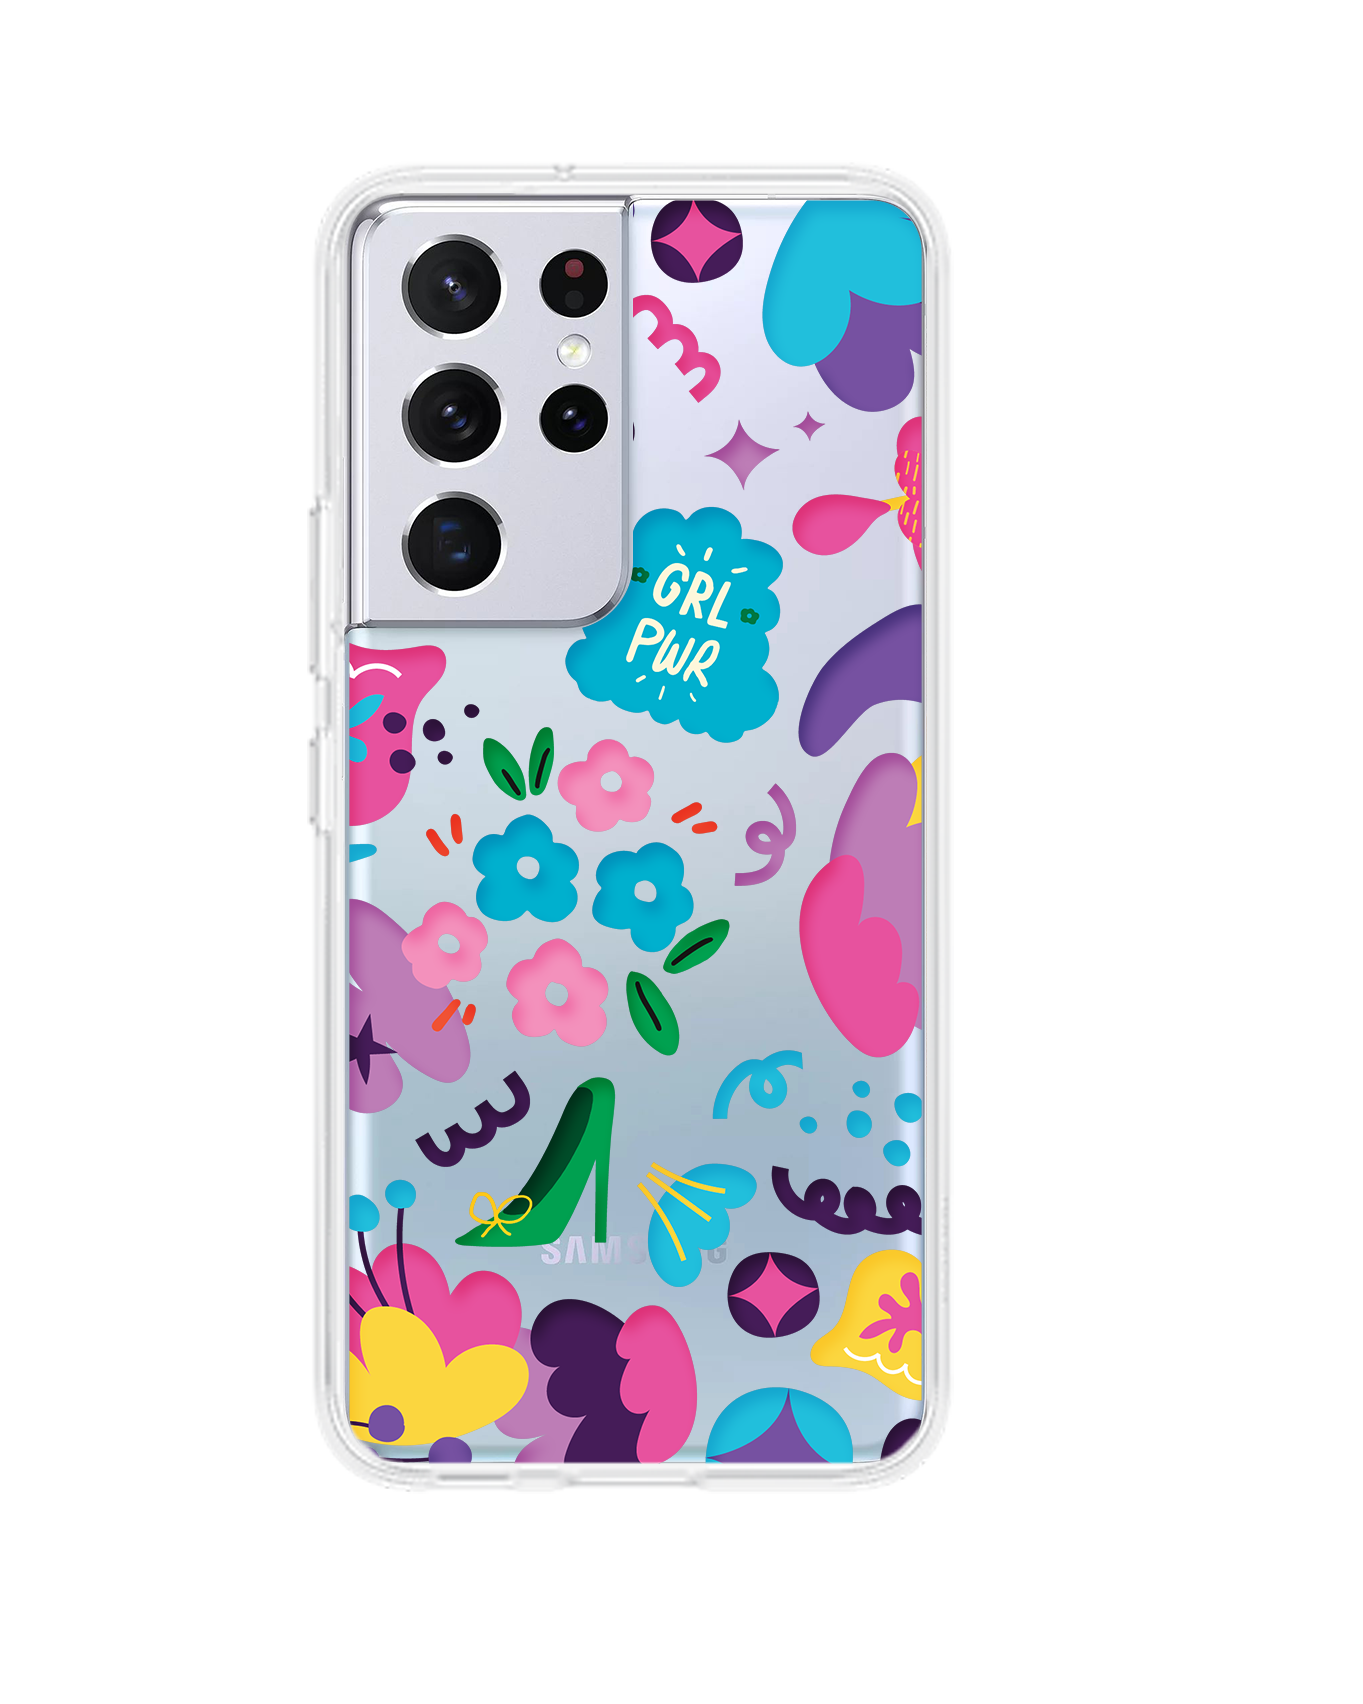 Android Rearguard Hybrid Case - Girl Power 1.0